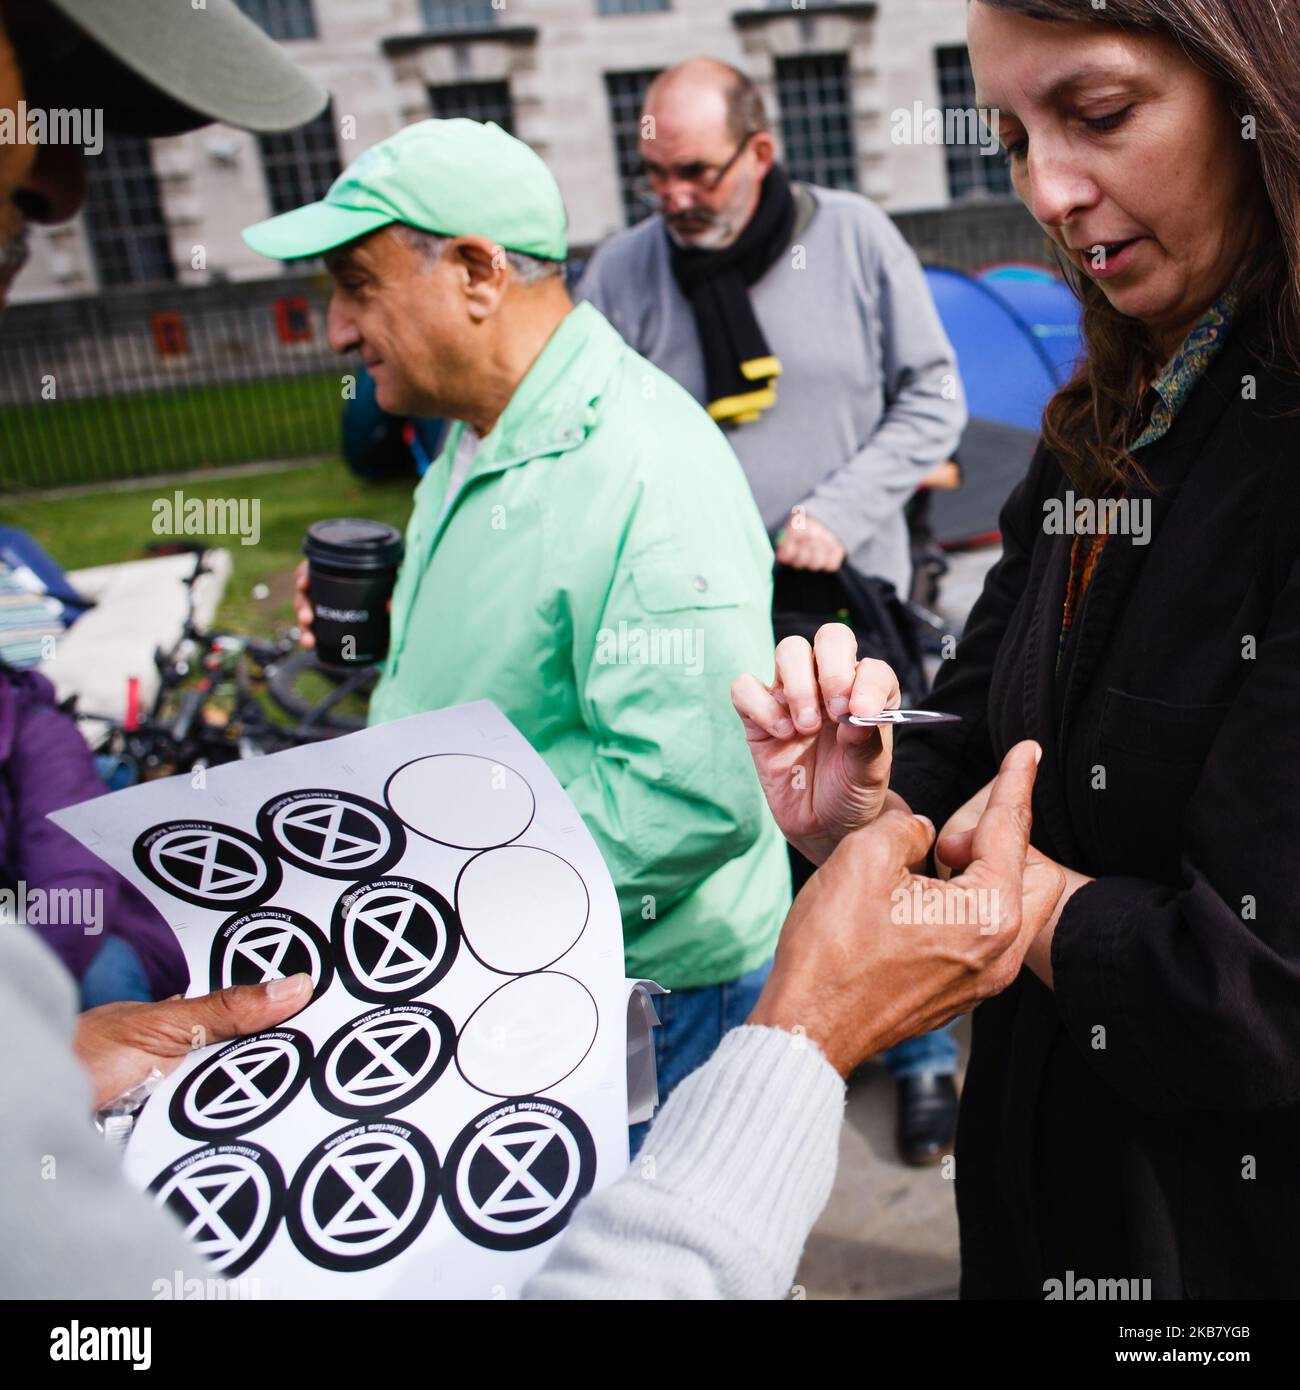 A members of climate change activist group Extinction Rebellion (XR) hands out stickers on Whitehall on the second day of the group's 'International Rebellion' in London, England, on October 8, 2019. By early Tuesday evening the Metropolitan Police were reporting that a total of 531 arrests had been made over the two days of protests in the city so far, with police officers working to clear people and tents from many of the sites taken over by activists yesterday. Similar blockades by Extinction Rebellion in April, at sites including Oxford Circus and Waterloo Bridge, saw more than 1,000 arres Stock Photo